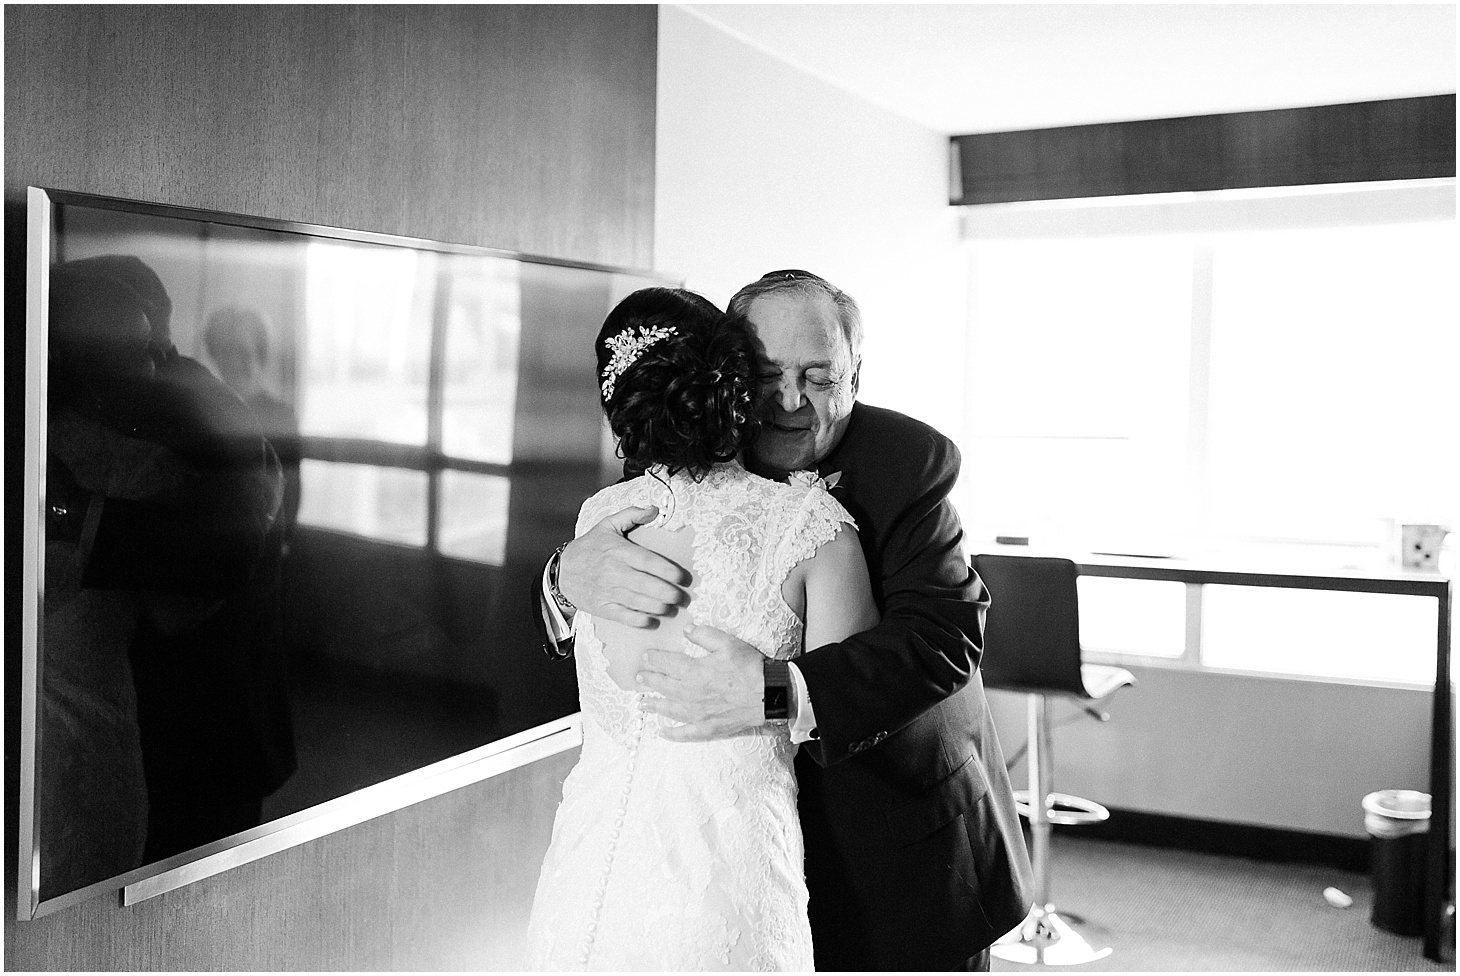 Bride and Grandfather at Liaison Hotel, Hexagon-Inspired Emerald Wedding at Union Station in Washington DC, Sarah Bradshaw Photography